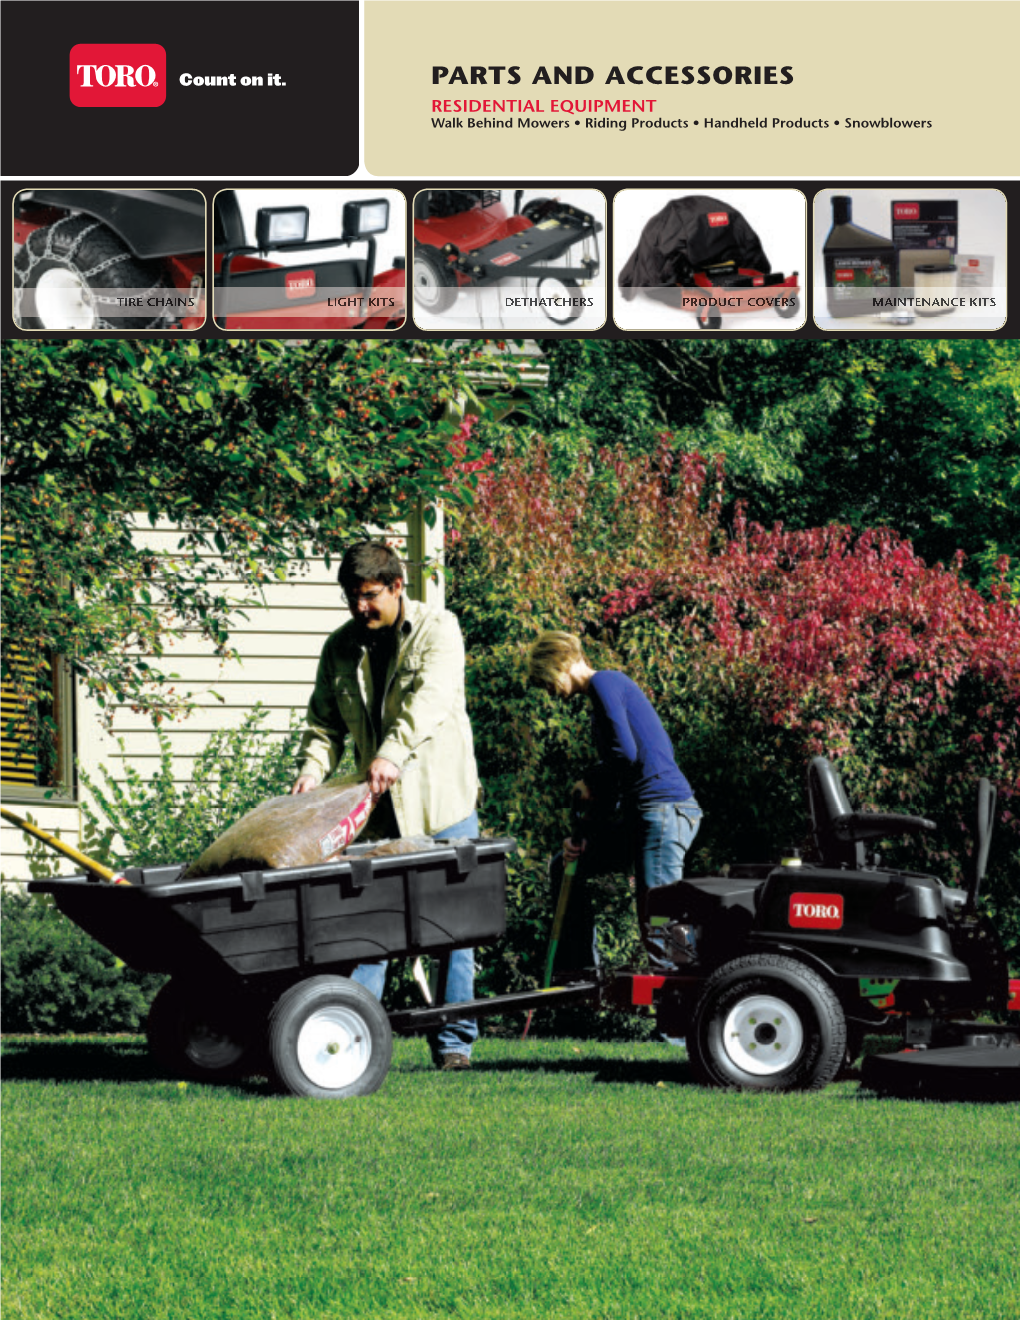 PARTS and ACCESSORIES RESIDENTIAL EQUIPMENT Walk Behind Mowers • Riding Products • Handheld Products • Snowblowers